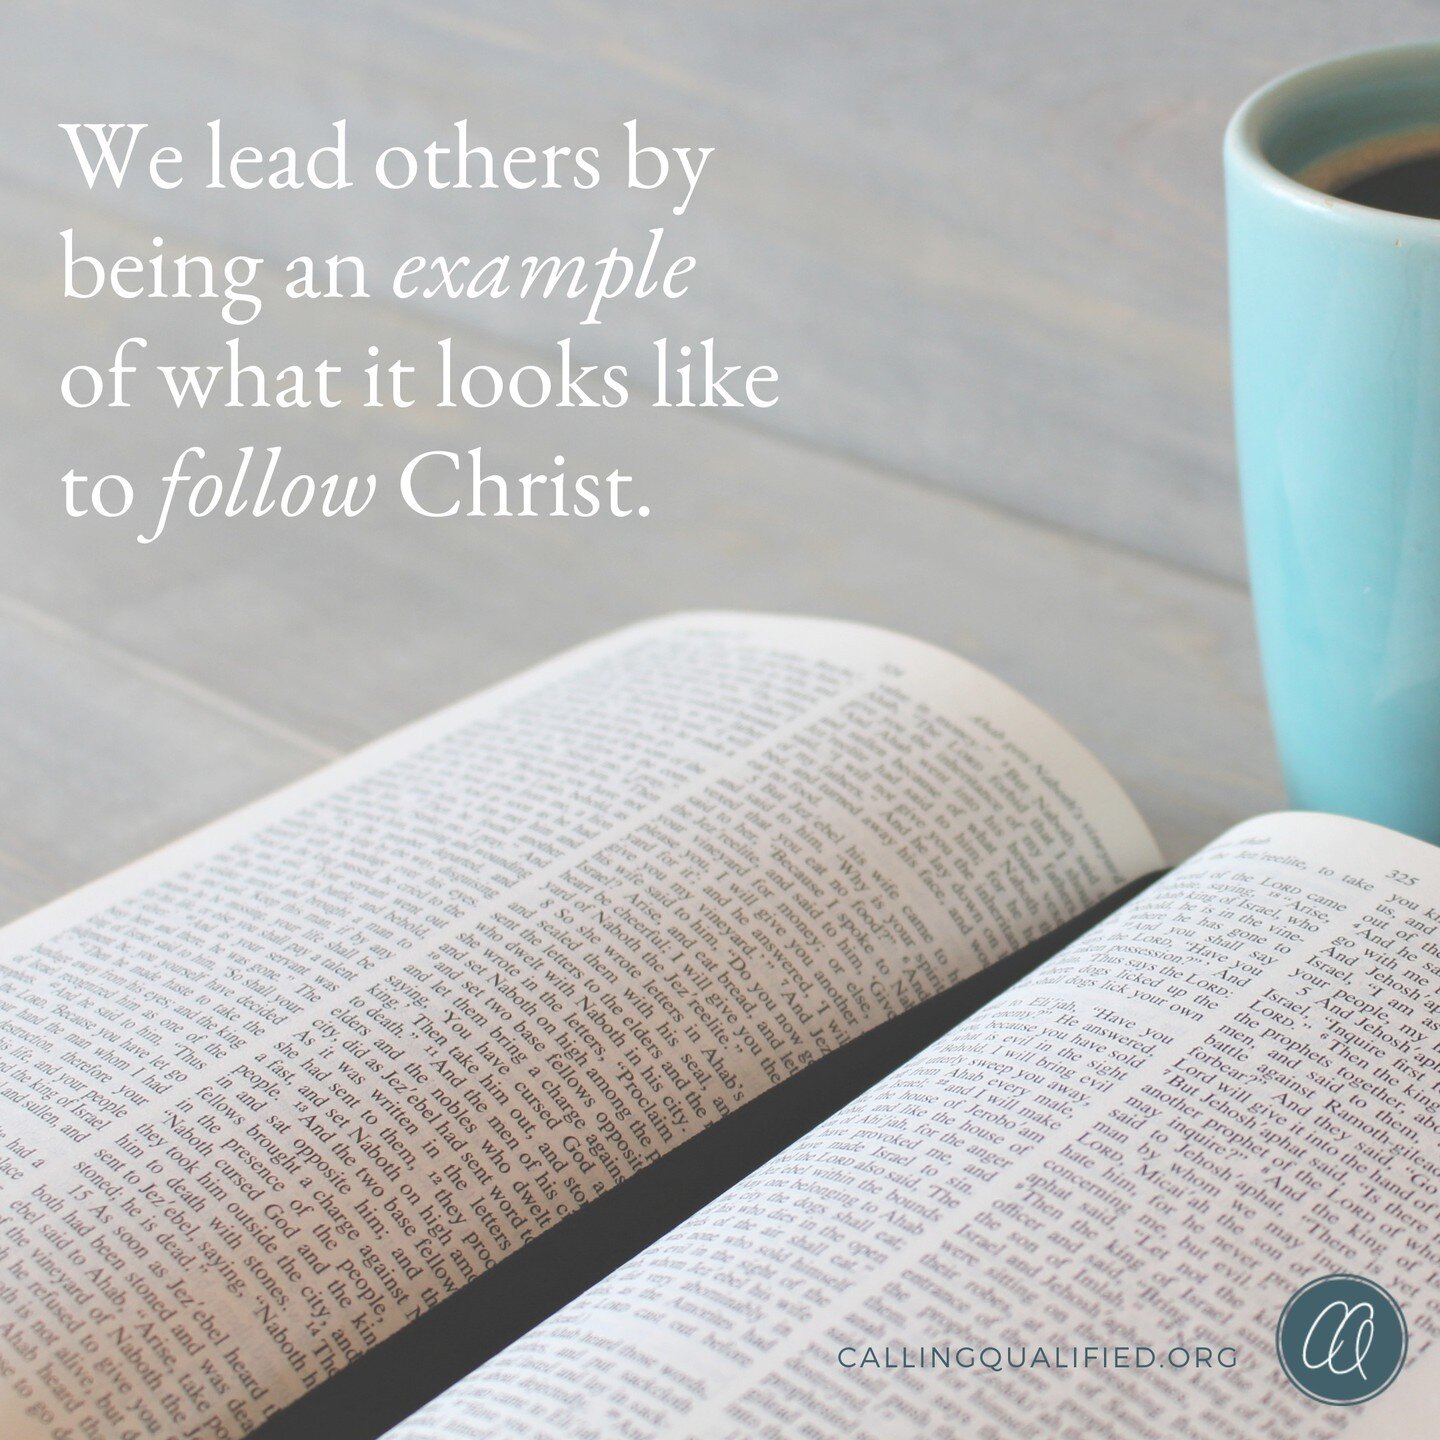 To lead, we have to serve. To lead, we have to follow. To lead, we have to submit. 

That can sound daunting, but, thankfully, we have the best example in Jesus. 

Paul said it best in 1 Corinthians 11:1:

&ldquo;Follow my example, as I follow the ex